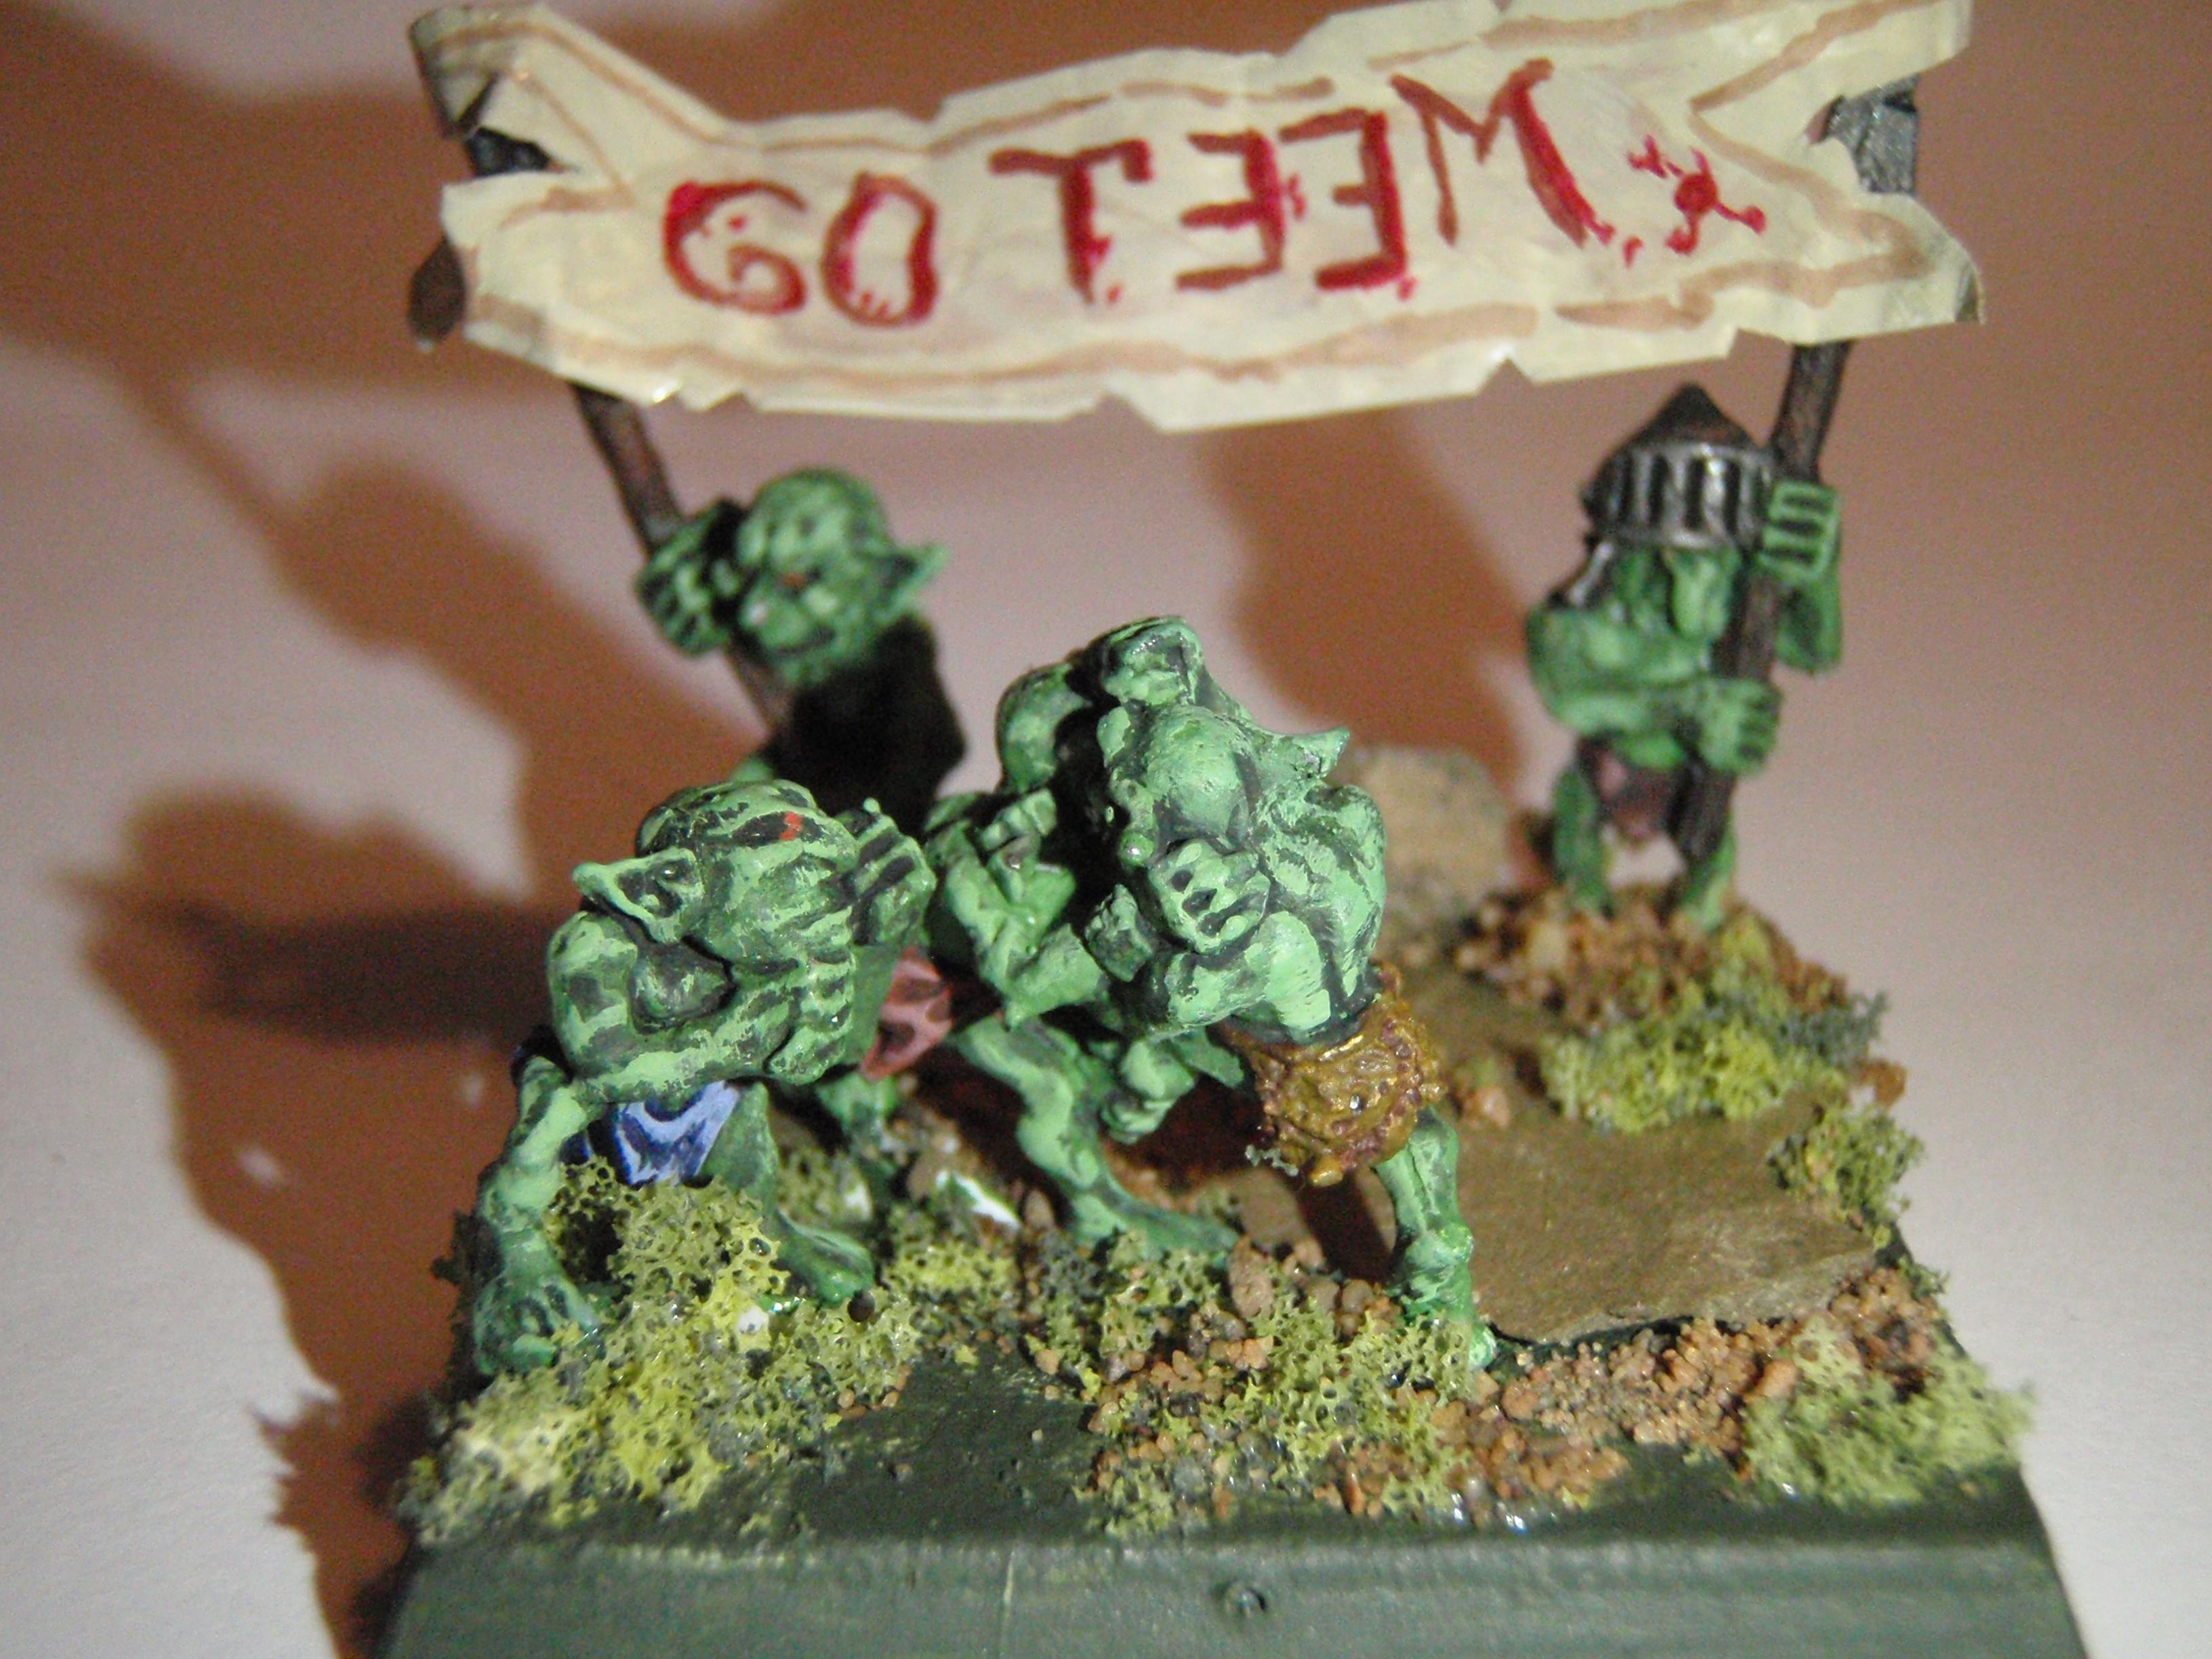 Diorama, Snotlings, Great snotling diorama painted by our friend Gene